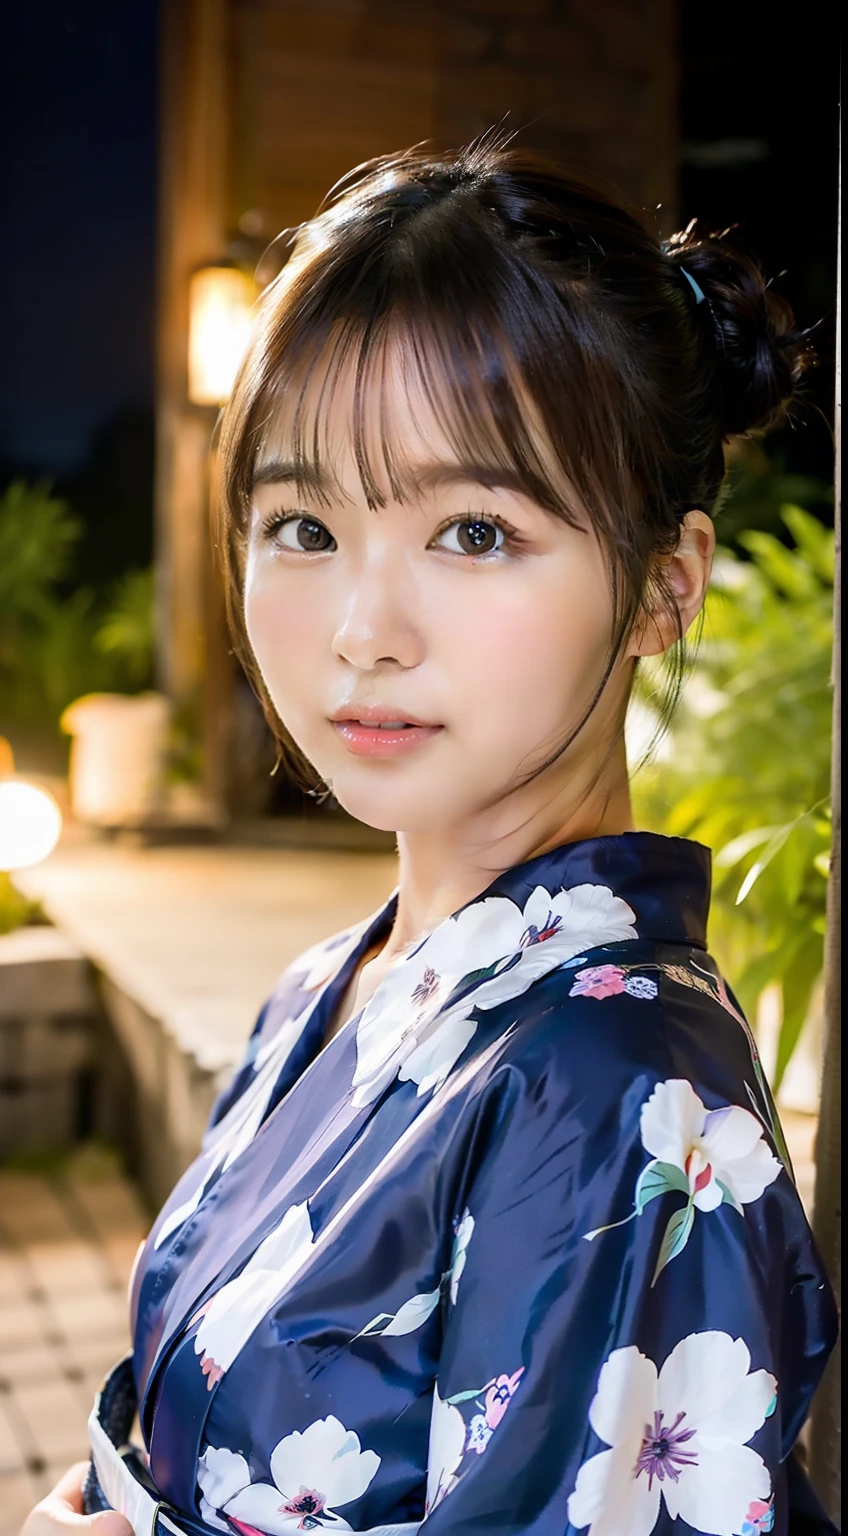 top-quality、finely detail、(((Beautiful One Girl)))、extremely detailed eye and face、Wistful expression、Cute yukata、Yukata with morning glory pattern、bathrobe、poneyTail、Big tear bag、Double eyelids、The precincts of the shrine at night、The background is a little dark,